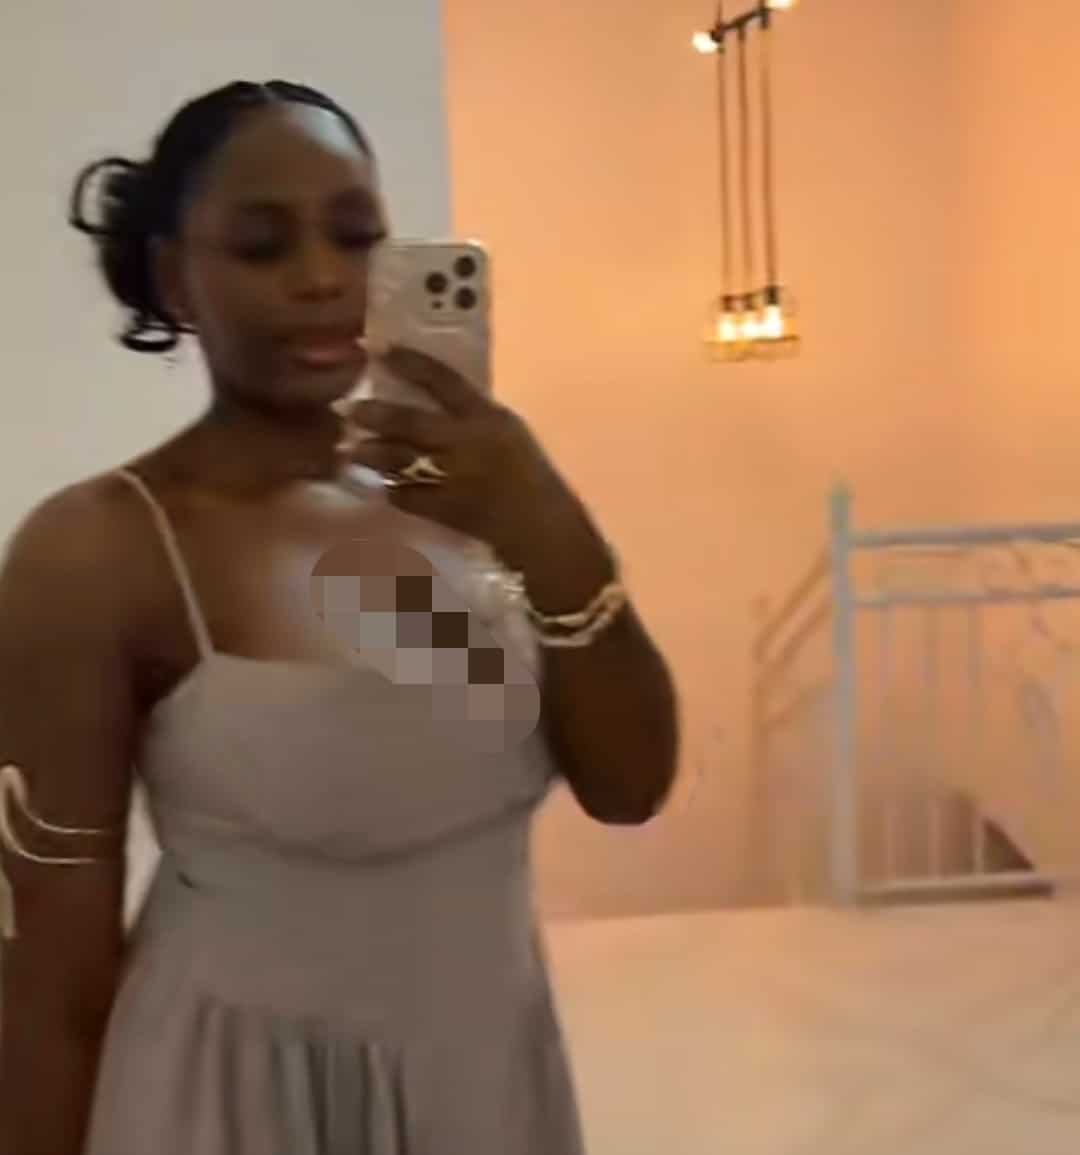 "Lagos is wild" - Shocking moment as bold woman begs, offers Nigerian lady €700 to join her and husband in bed